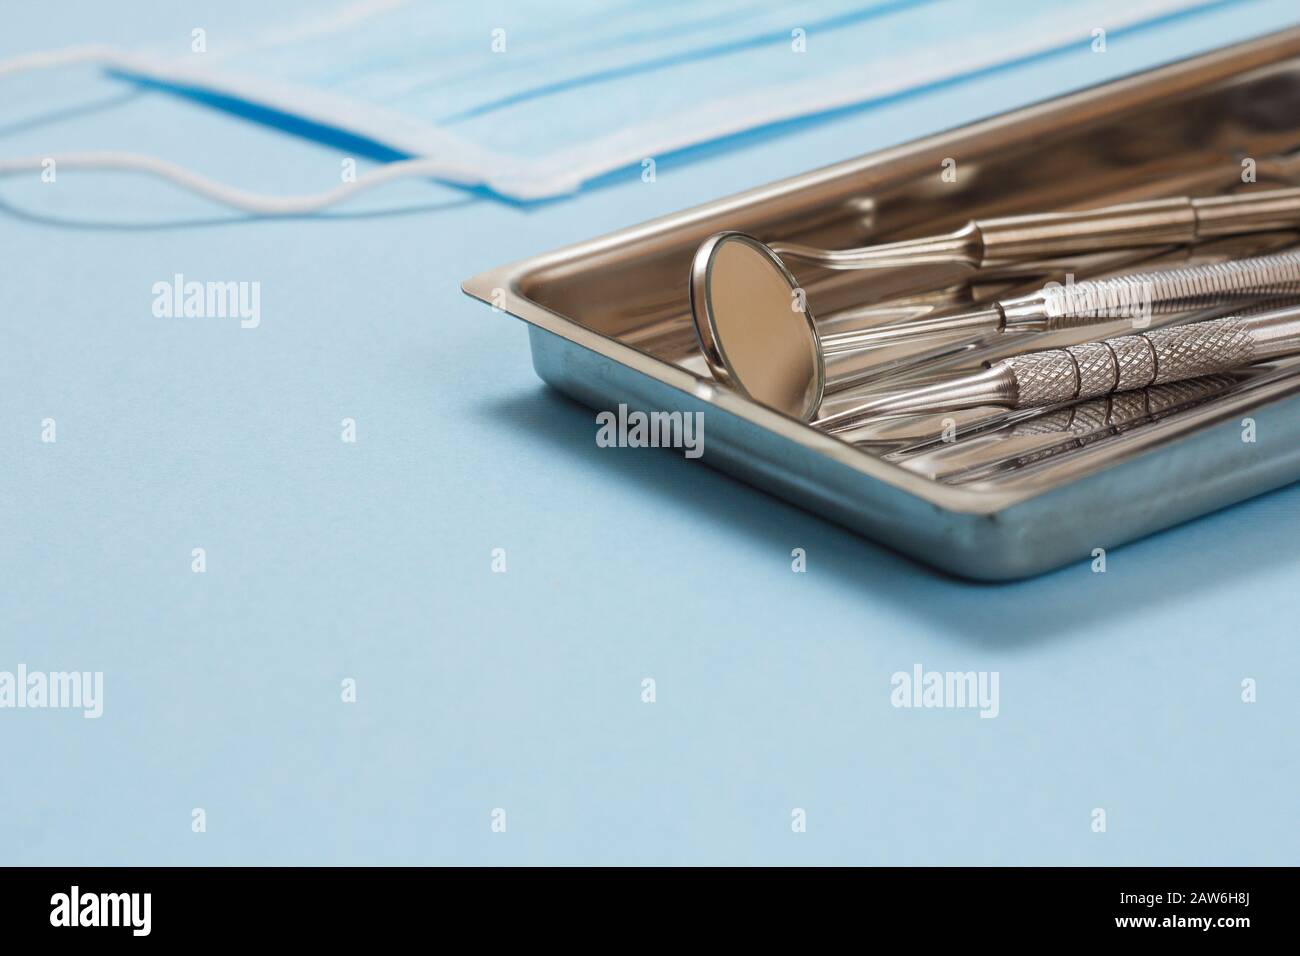 Set of composite filling instruments for dental treatment. Medical tools in stainless steel tray and a mask on blue background. Shallow depth of field Stock Photo